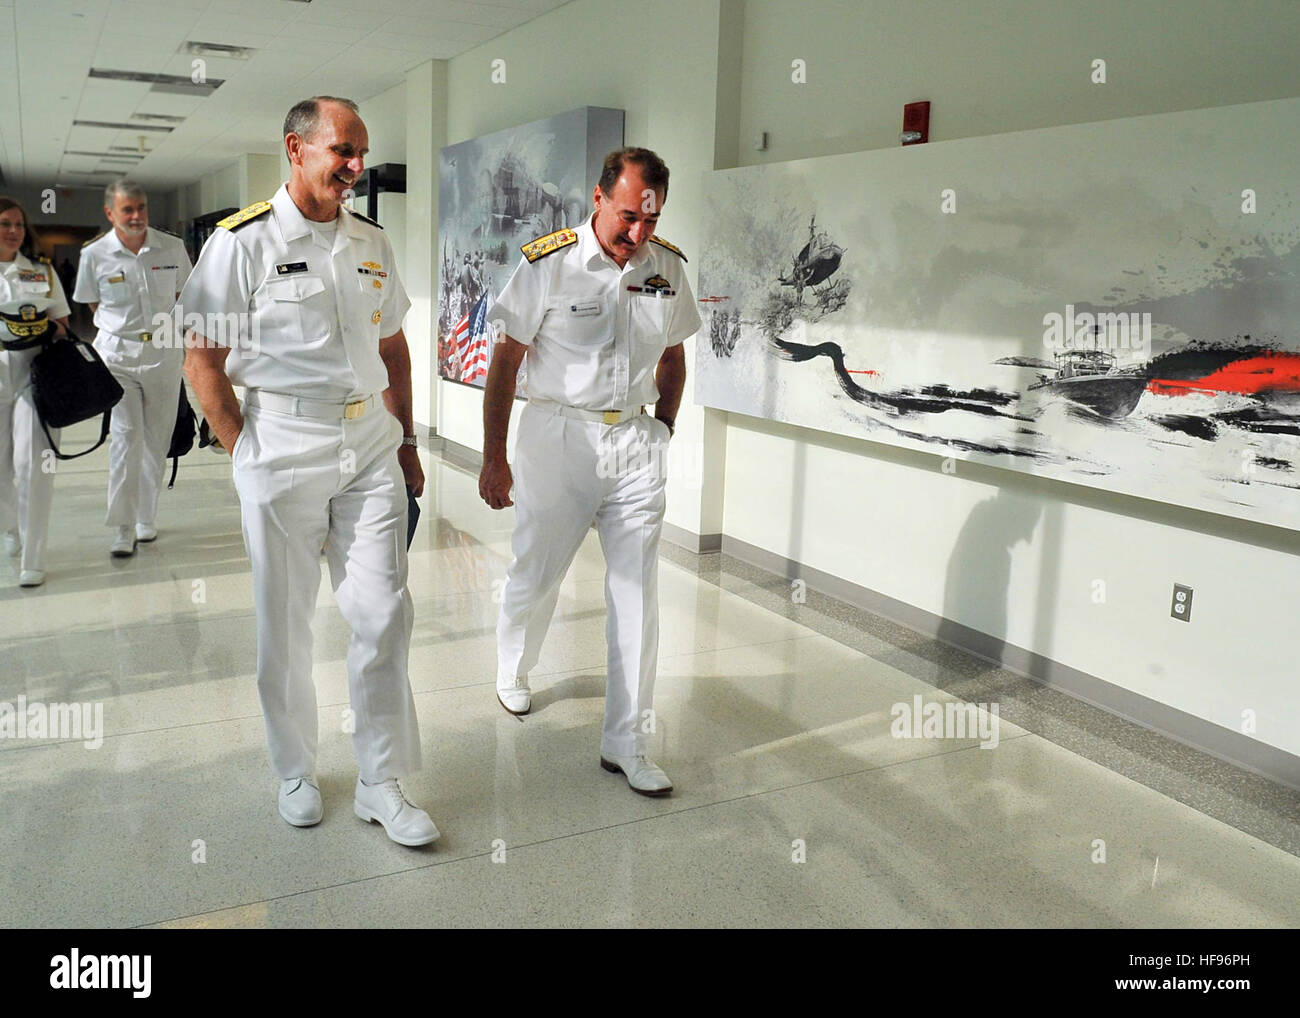 130606-N-ZI511-237.WASHINGTON (June 6, 2013) Chief of Naval Operations (CNO) Adm. Jonathan Greenert meets with First Sea Lord Adm. Sir George Zambellas during United States and United Kingdom staff talks at National Defense University. Greenert and Zambellas along with 30 other U.S. Navy and Royal Navy officers met to discuss issues of mutual concern and the maritime challenges both nations face in the future. (U.S. Navy photo by Chief Mass Communication Specialist Julianne Metzger/Released). Chief of U.S. Naval Operations Adm. Jonathan Greenert, front left, walks with British Royal Navy First Stock Photo